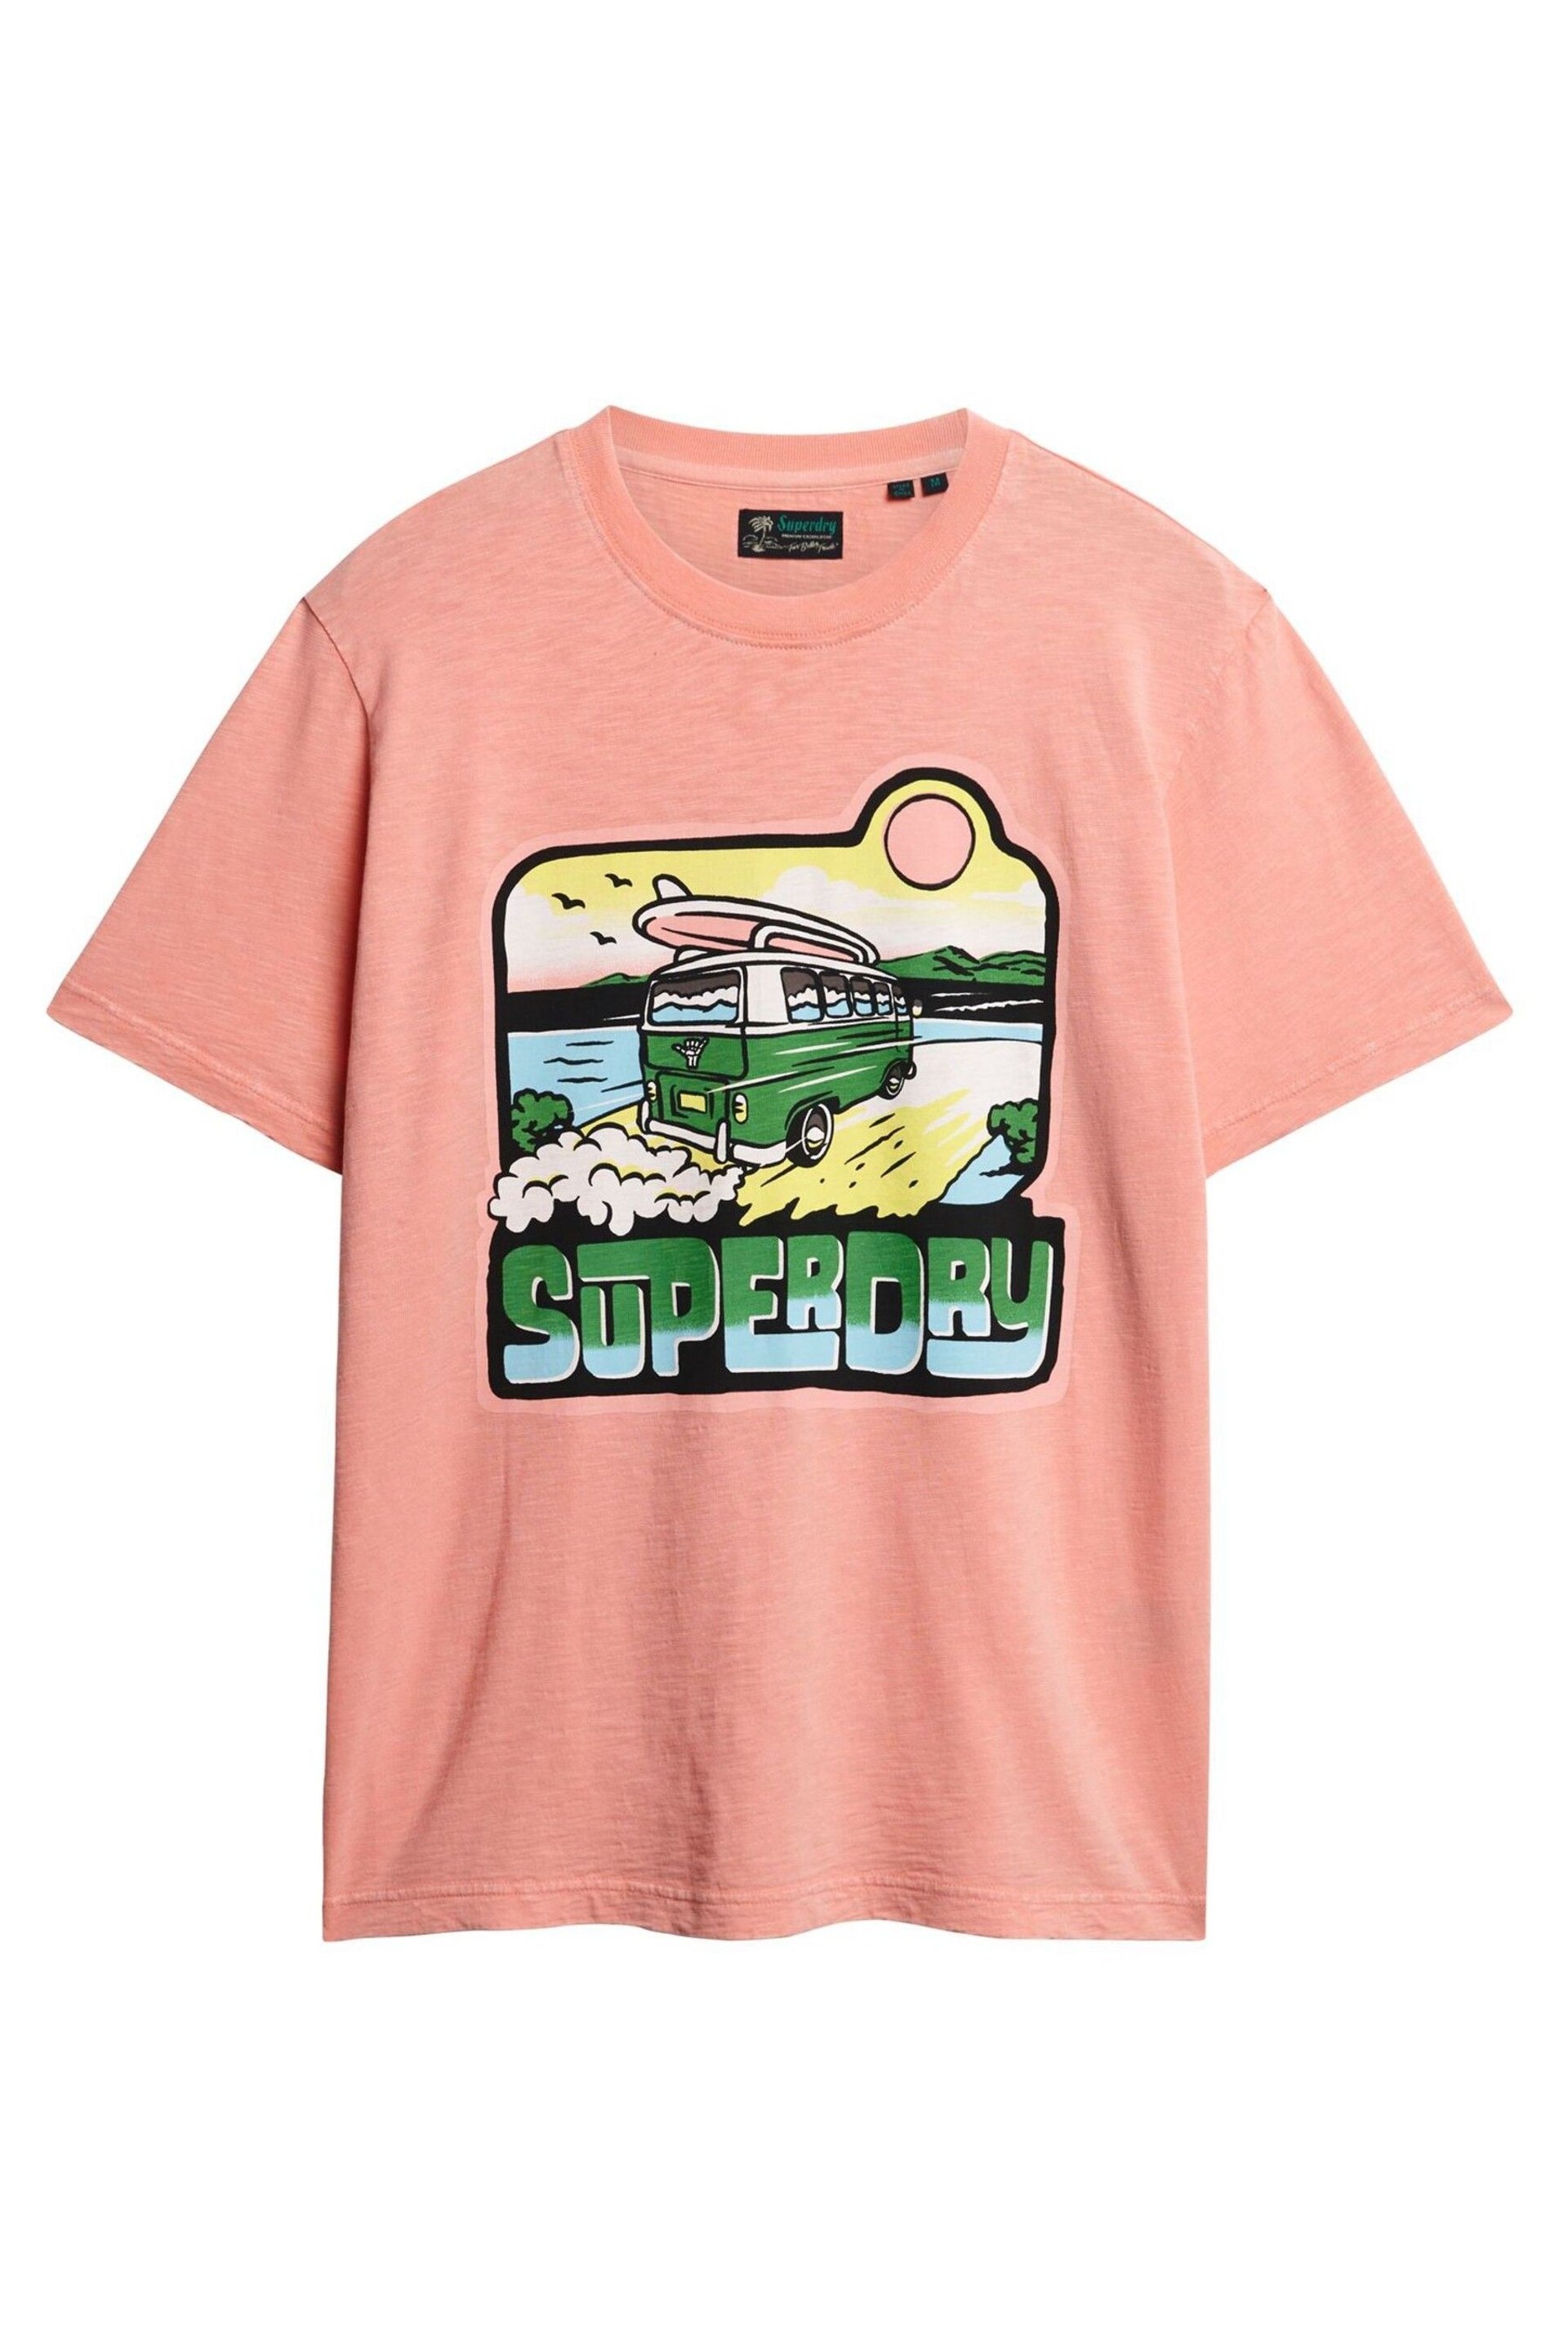 Superdry Pink Travel Graphic Loose T-Shirt - Image 4 of 5